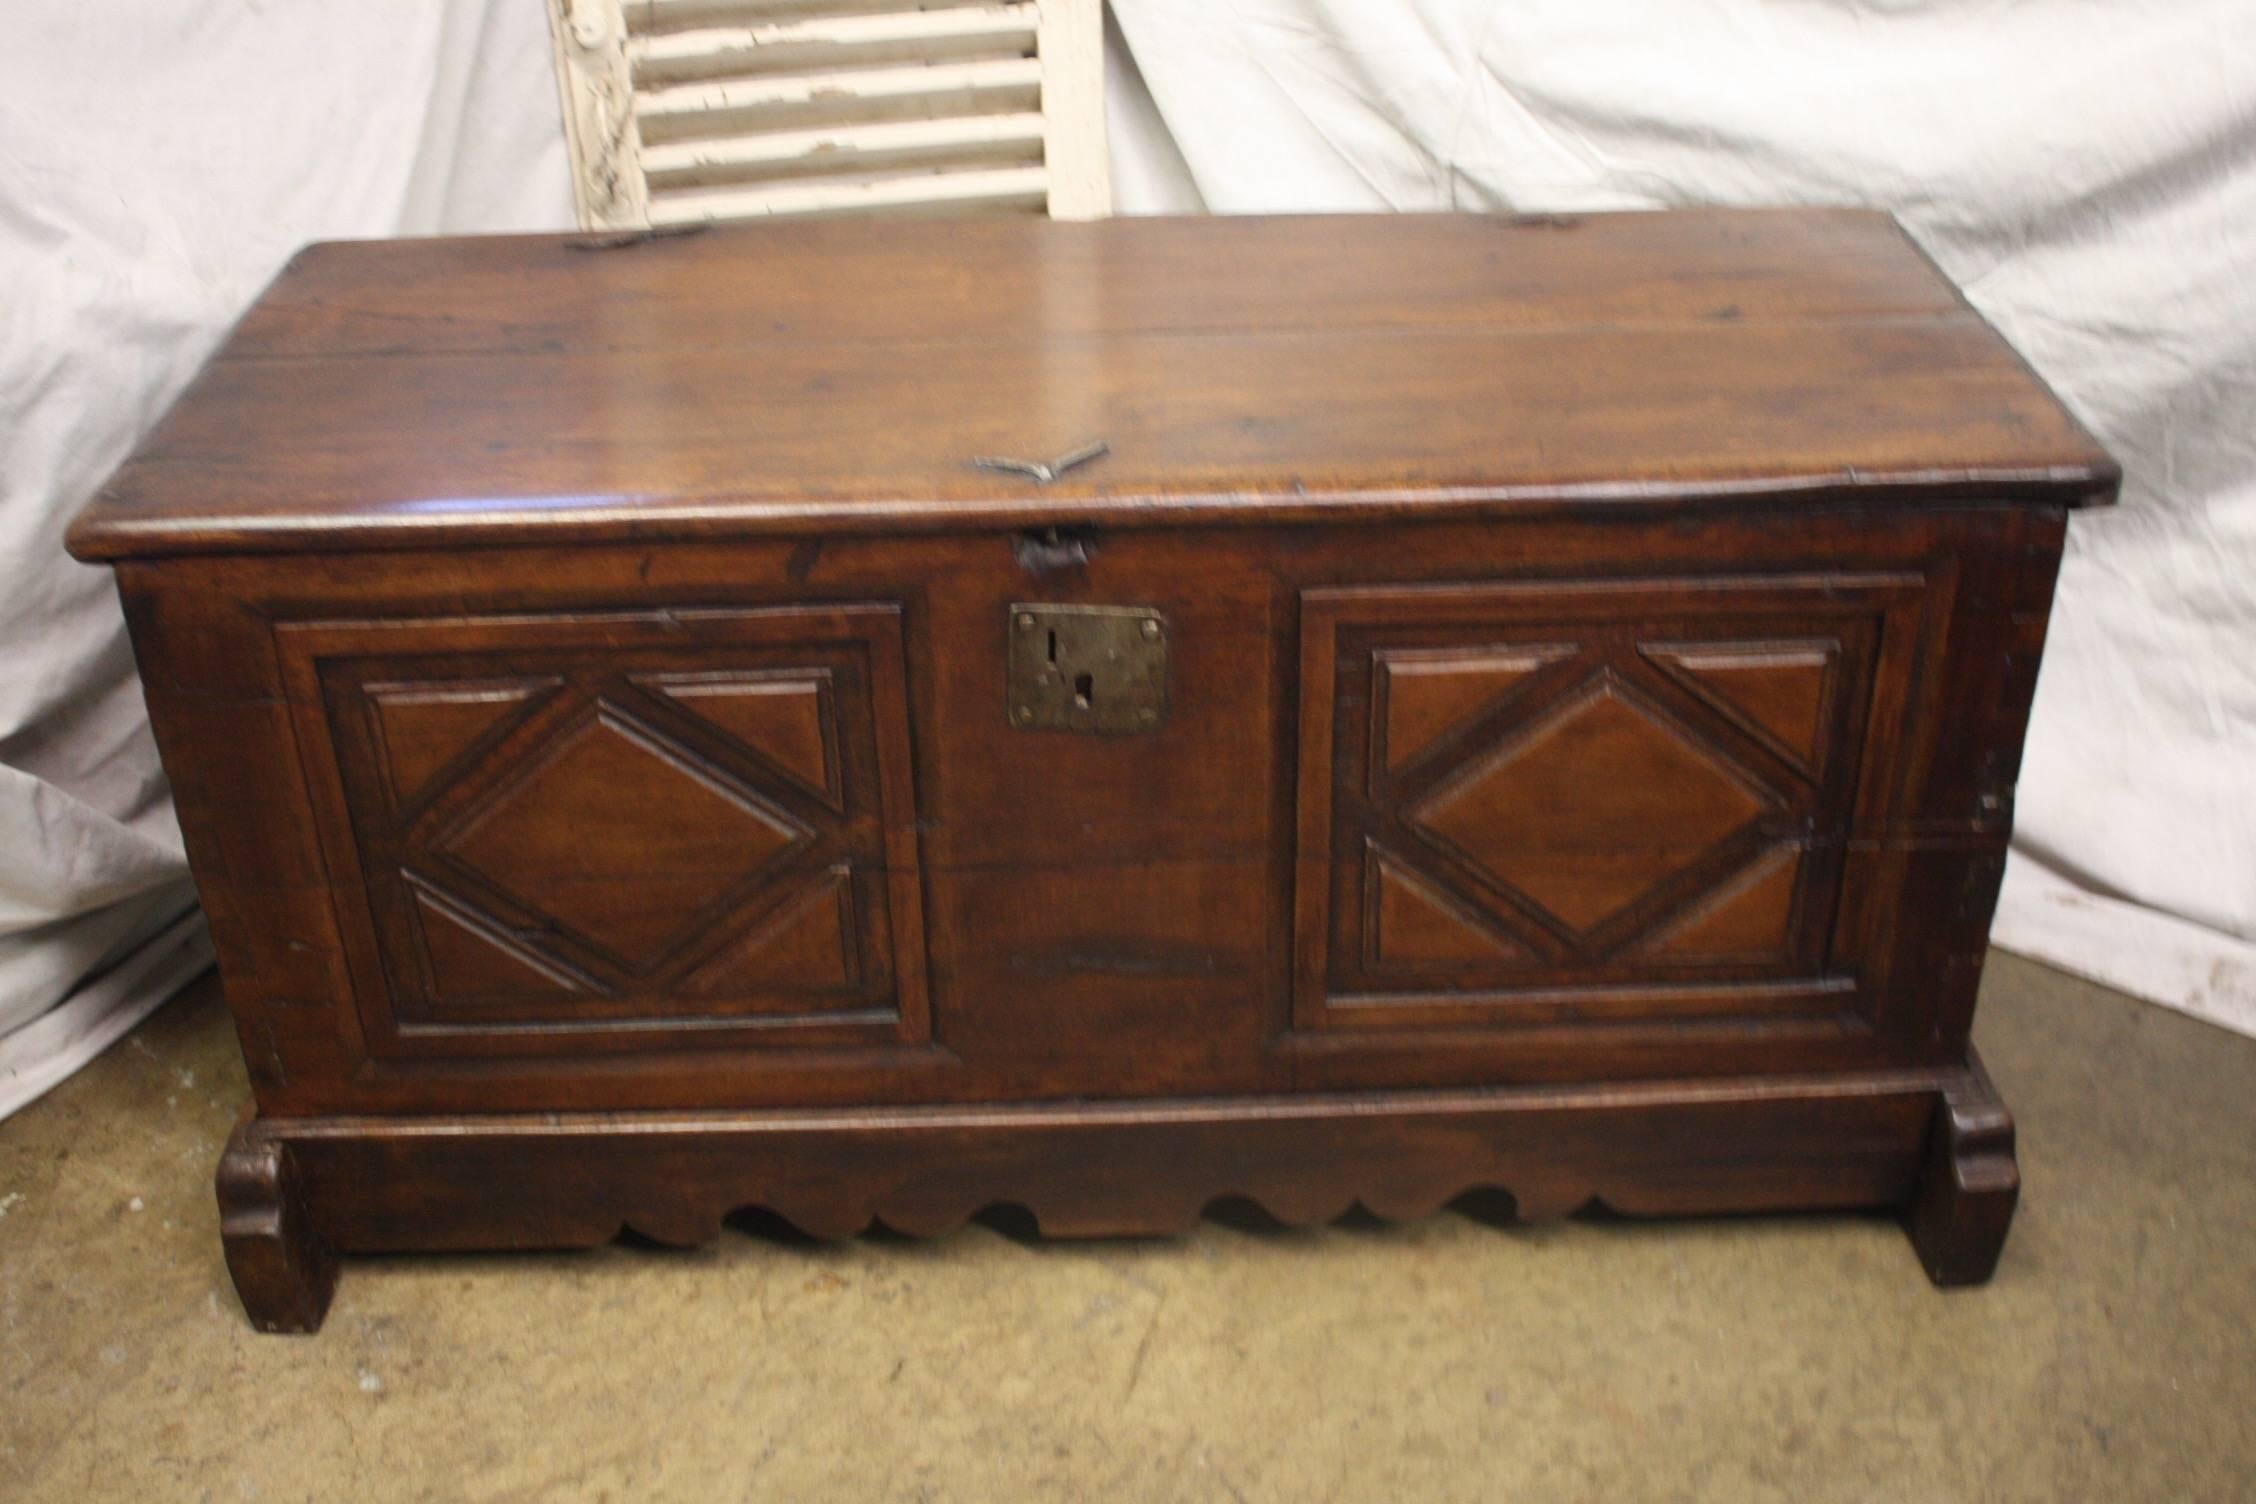 17th century French trunk.